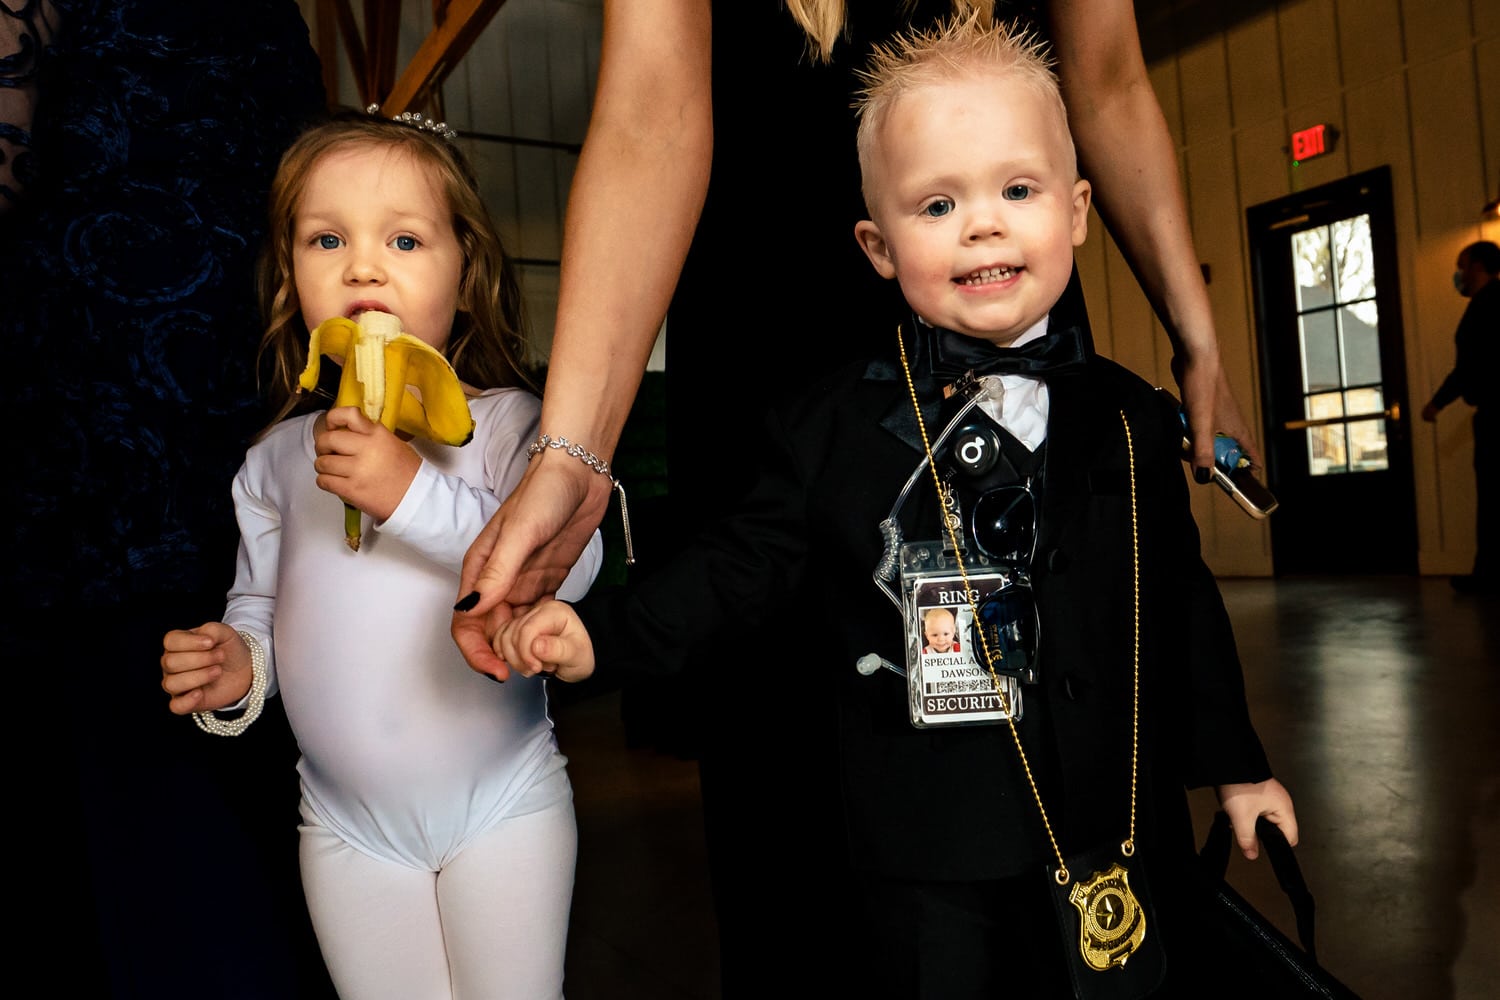 A candid picture of a ring bearer with a badge and a flower girl in a leotard eating a banana. 